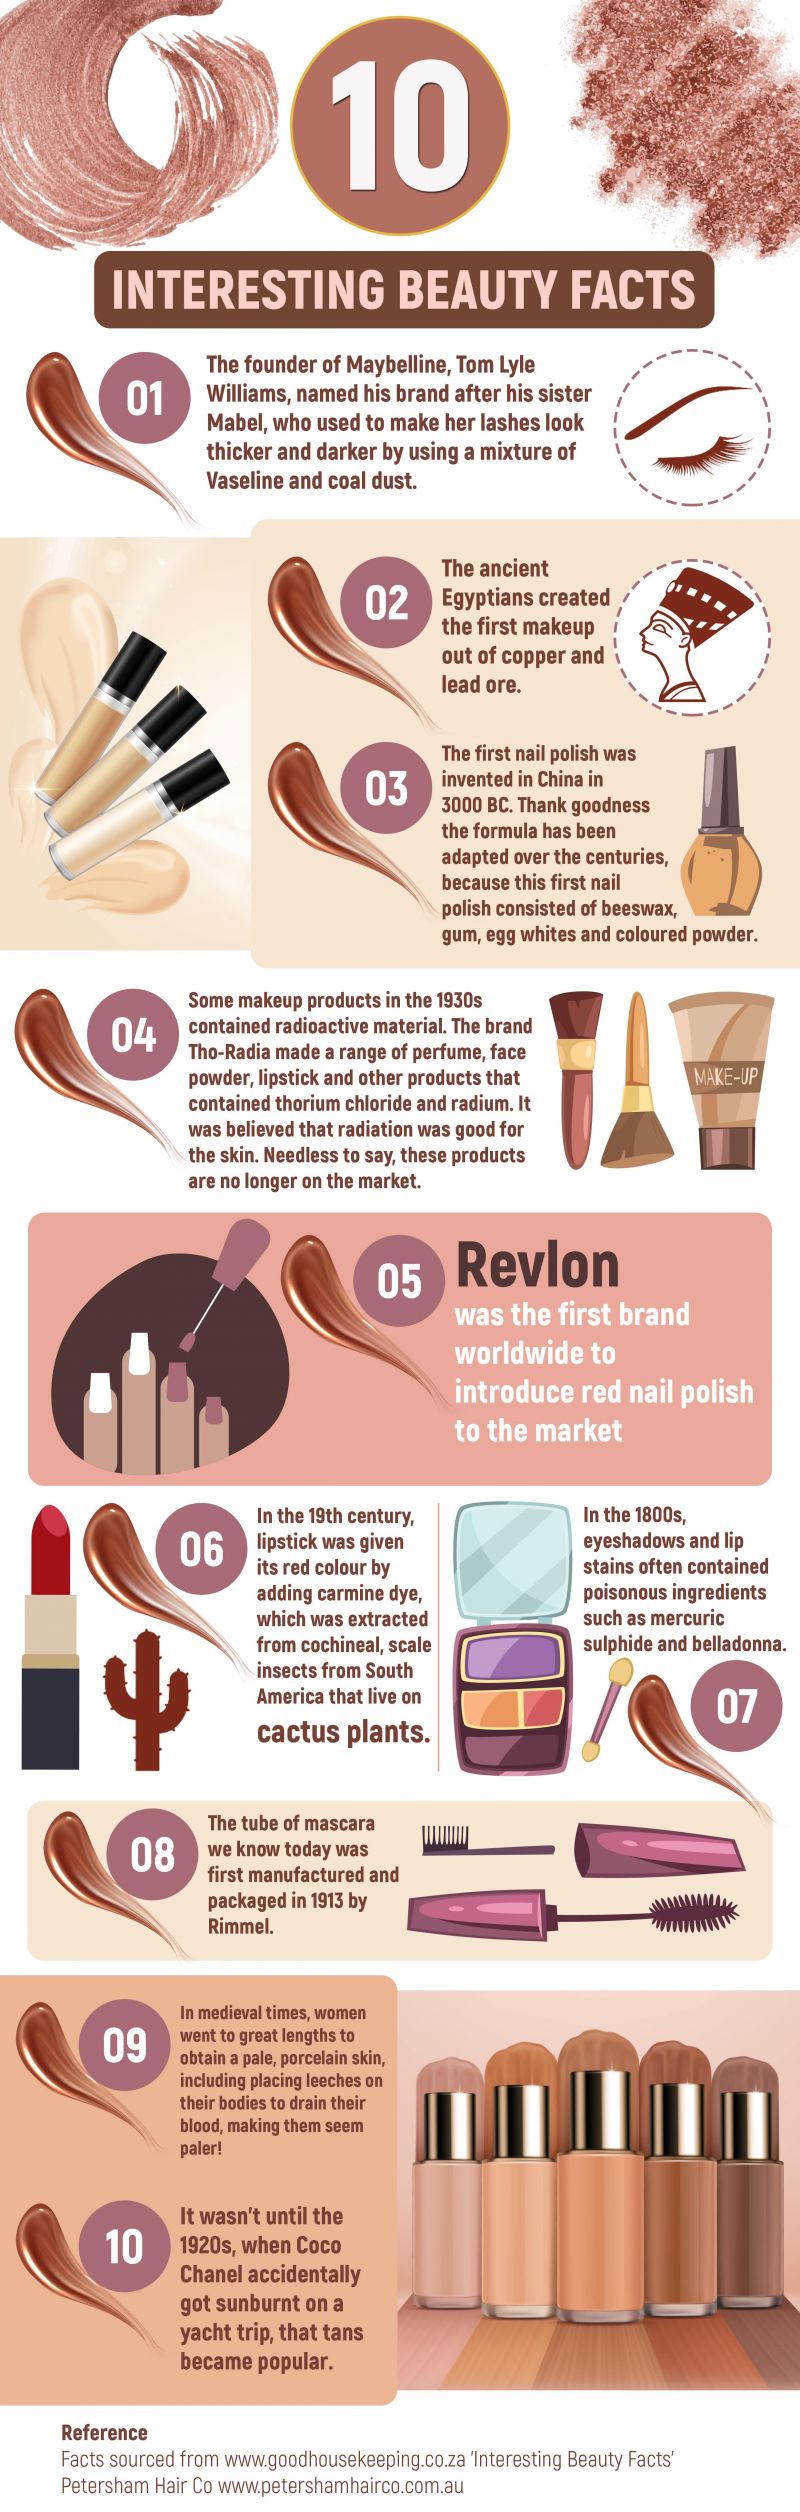 10 Interesting Beauty Facts | Visual.ly